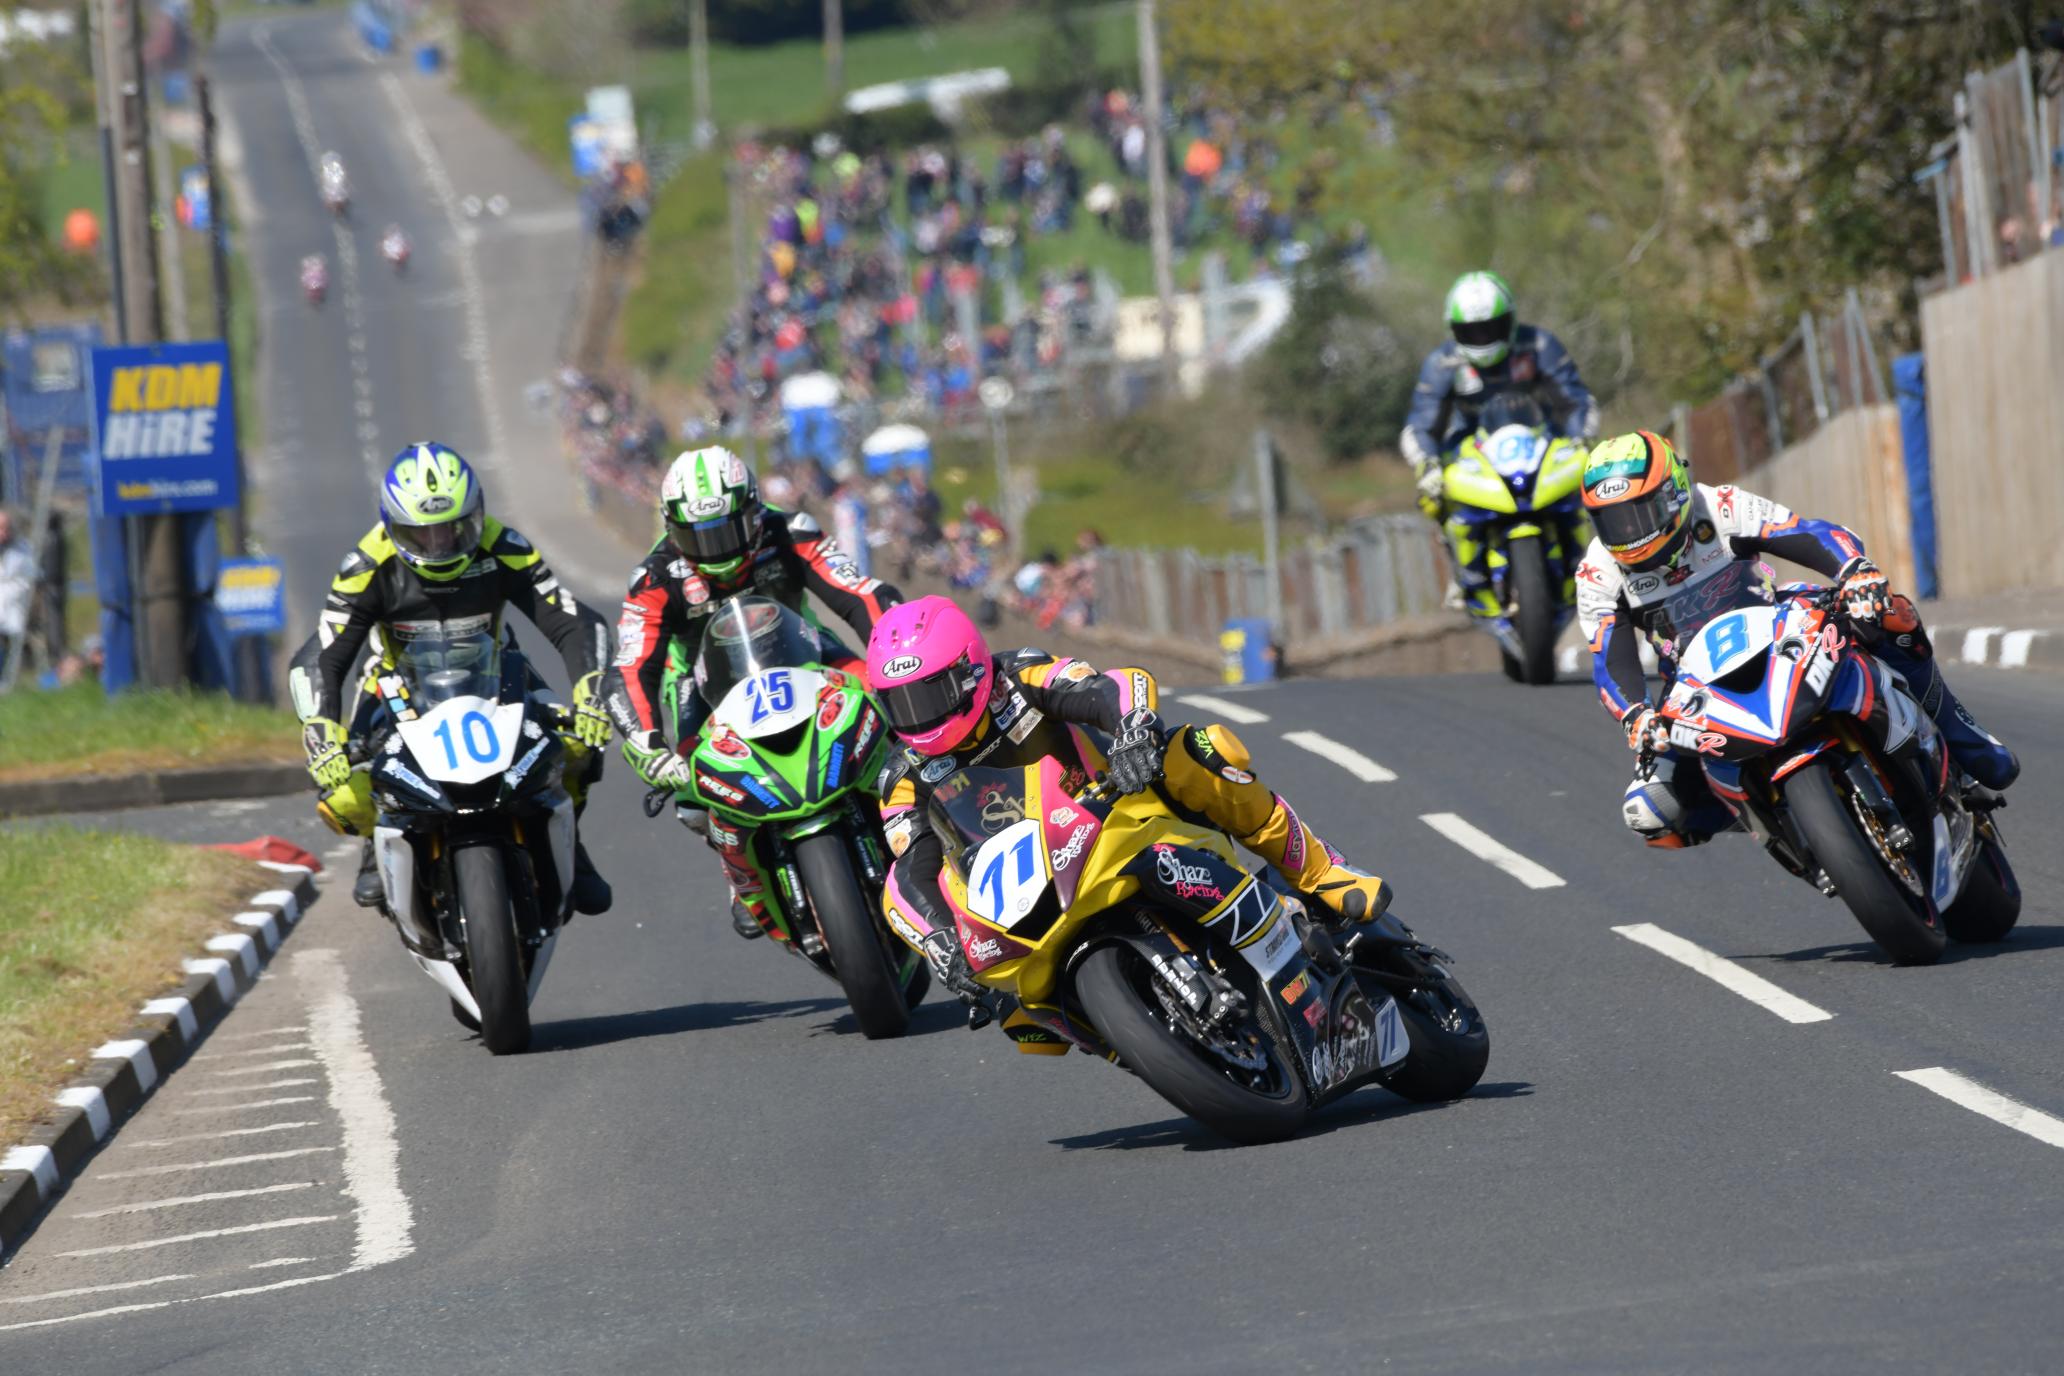 The race is on to save Cookstown 100